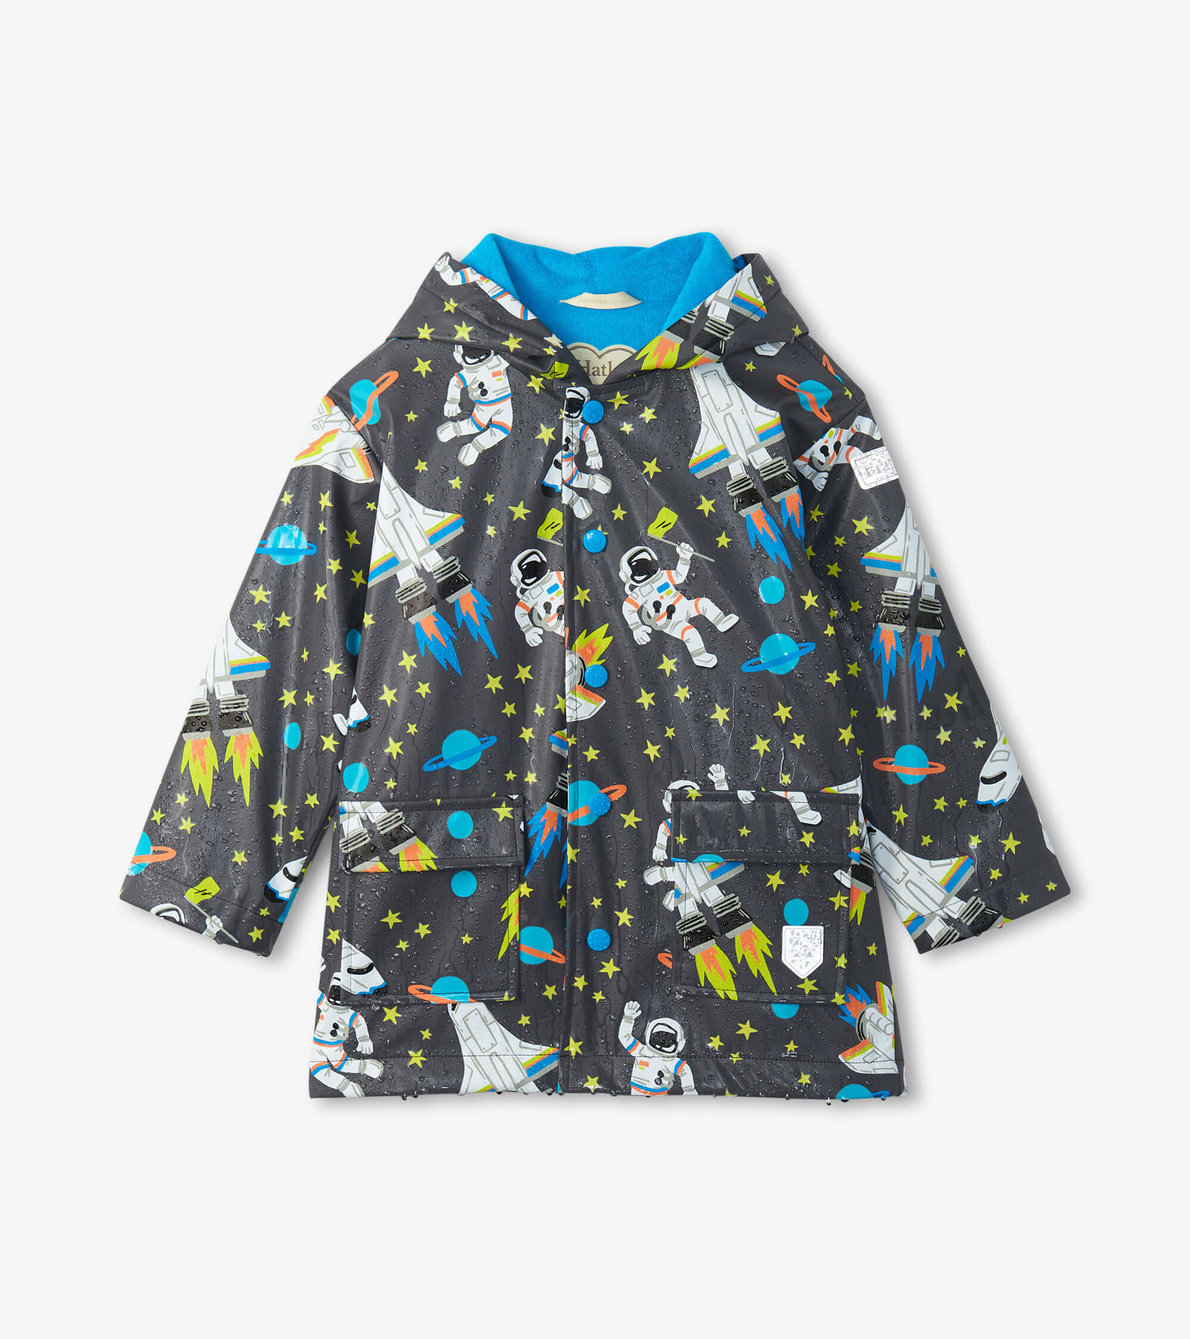 View larger image of Astronaut Colour Changing Kids Raincoat